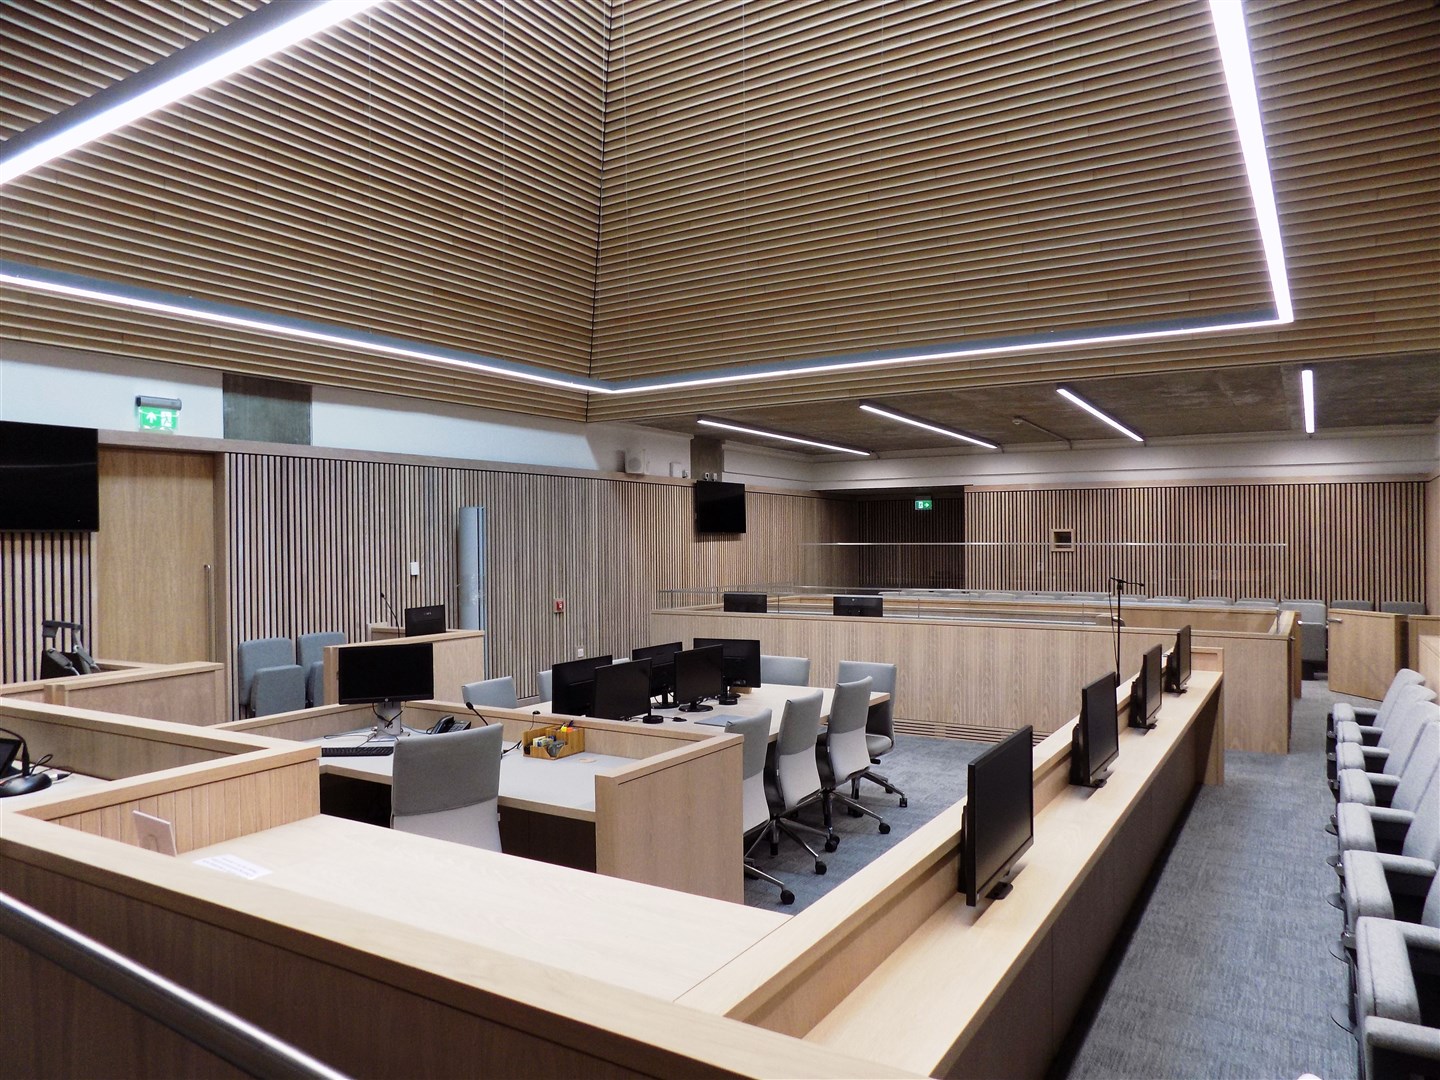 A court room inside the Inverness Justice Centre.